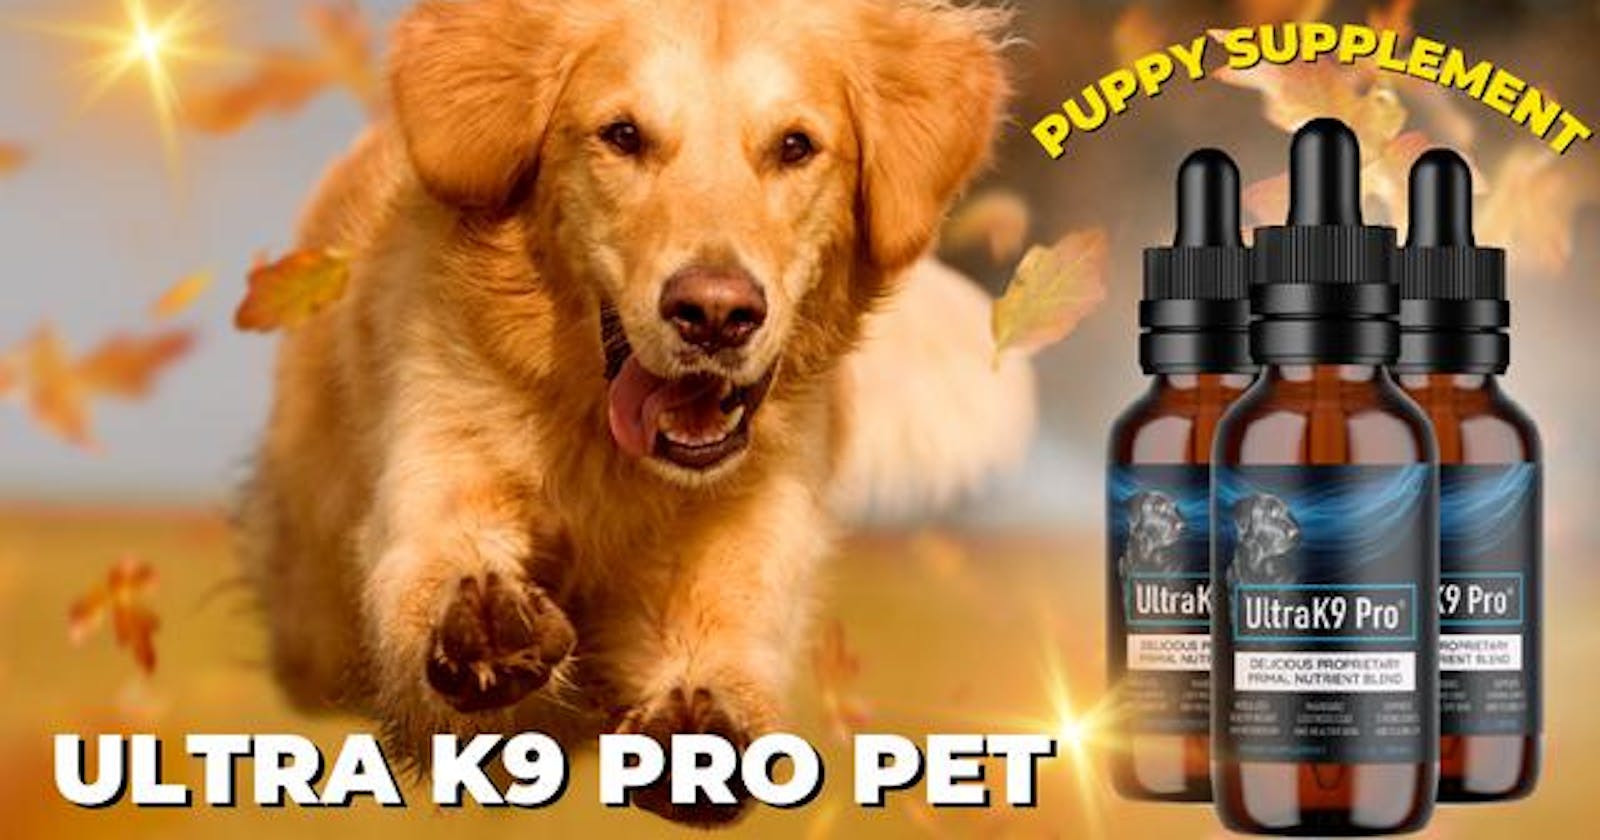 Ultra K9 Pro - Results, Reviews, Pros, Cons, Price, Scam Or Legit?